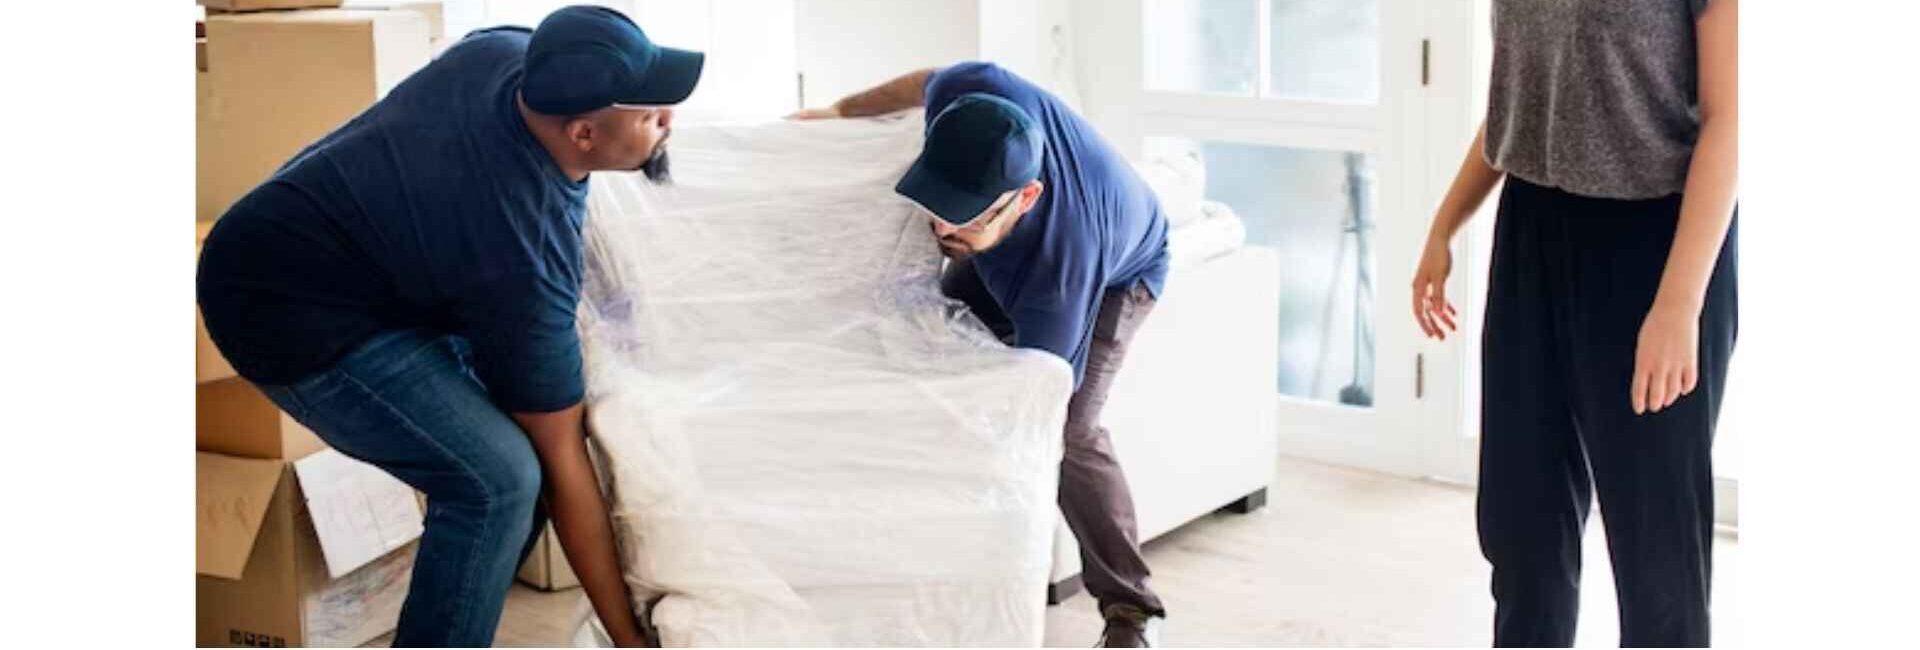 Balaji Packers And Movers - Packers and Movers Service in Noida